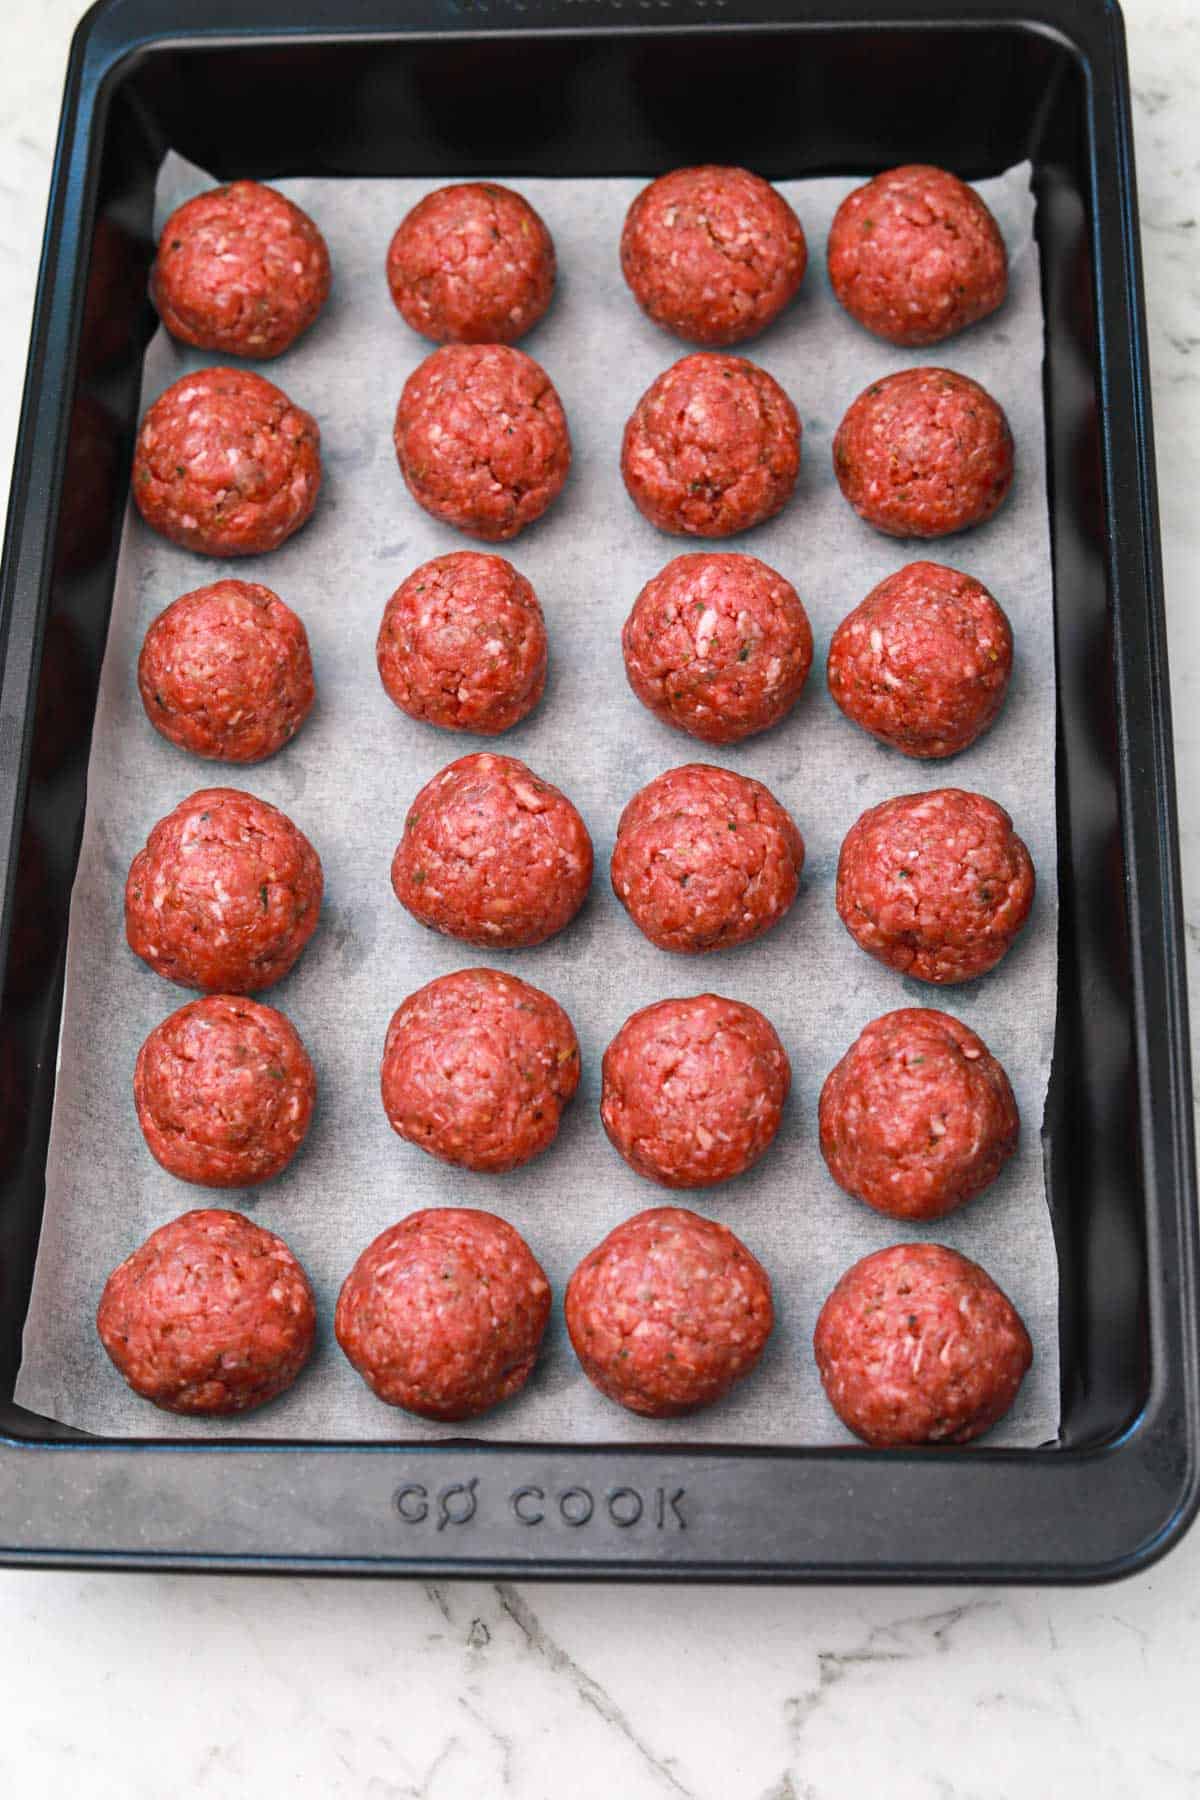 meatballs arranged on a baking paper lined tray.